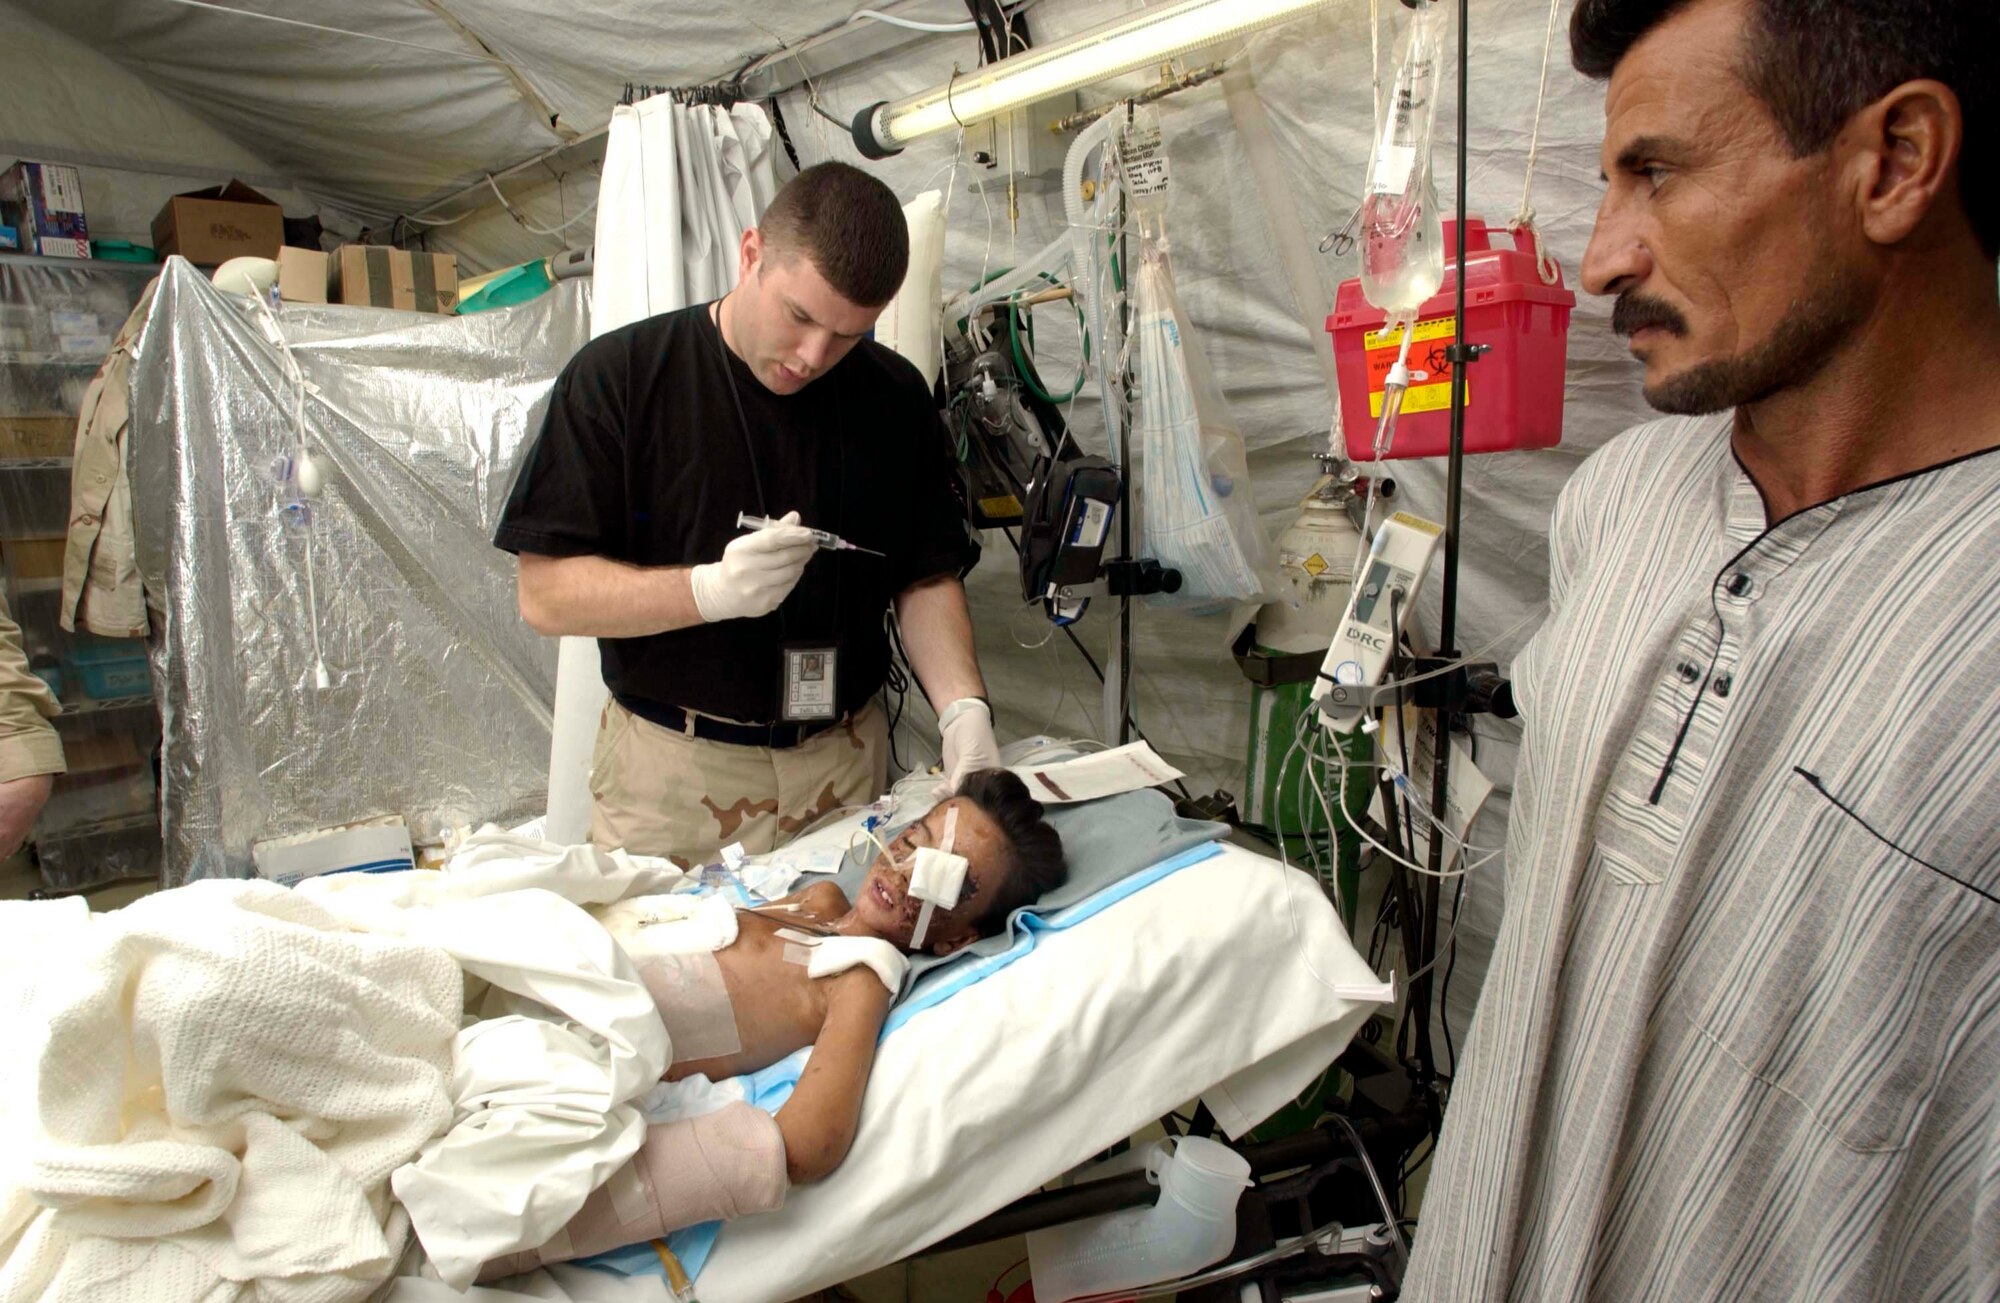 TALLIL AIR BASE, Iraq -- Capt. James Smith prepares medication for 9-year-old Saleh Kahlaf while his father, Raheem Kahlaf, watches.  Saleh was critically injured by a land mine near his school in Al Nasiriyah and had been cared for by 332nd Expeditionary Medical Squadron airmen until his aeromedical evacuation mission to the United States.  The boy arrived at Children's Hospital and Research Center in Oakland, Calif., on Nov. 10.  Smith is assigned to the 332nd EMEDS hospital here.  (U.S. Air Force photo by Master Sgt. Lance Cheung)